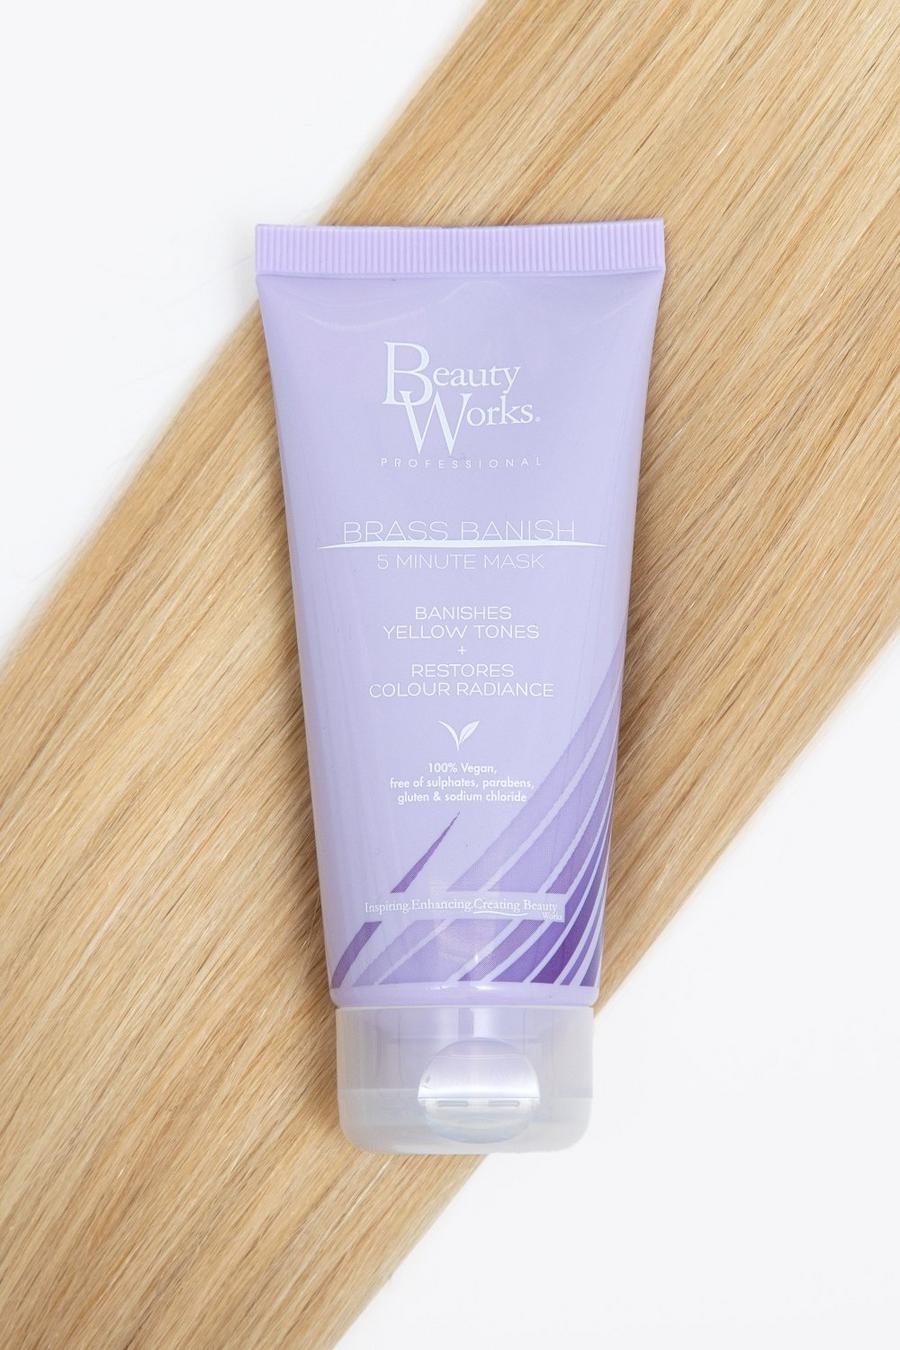 Beauty Works - Masque 5 minutes, Lilac purple